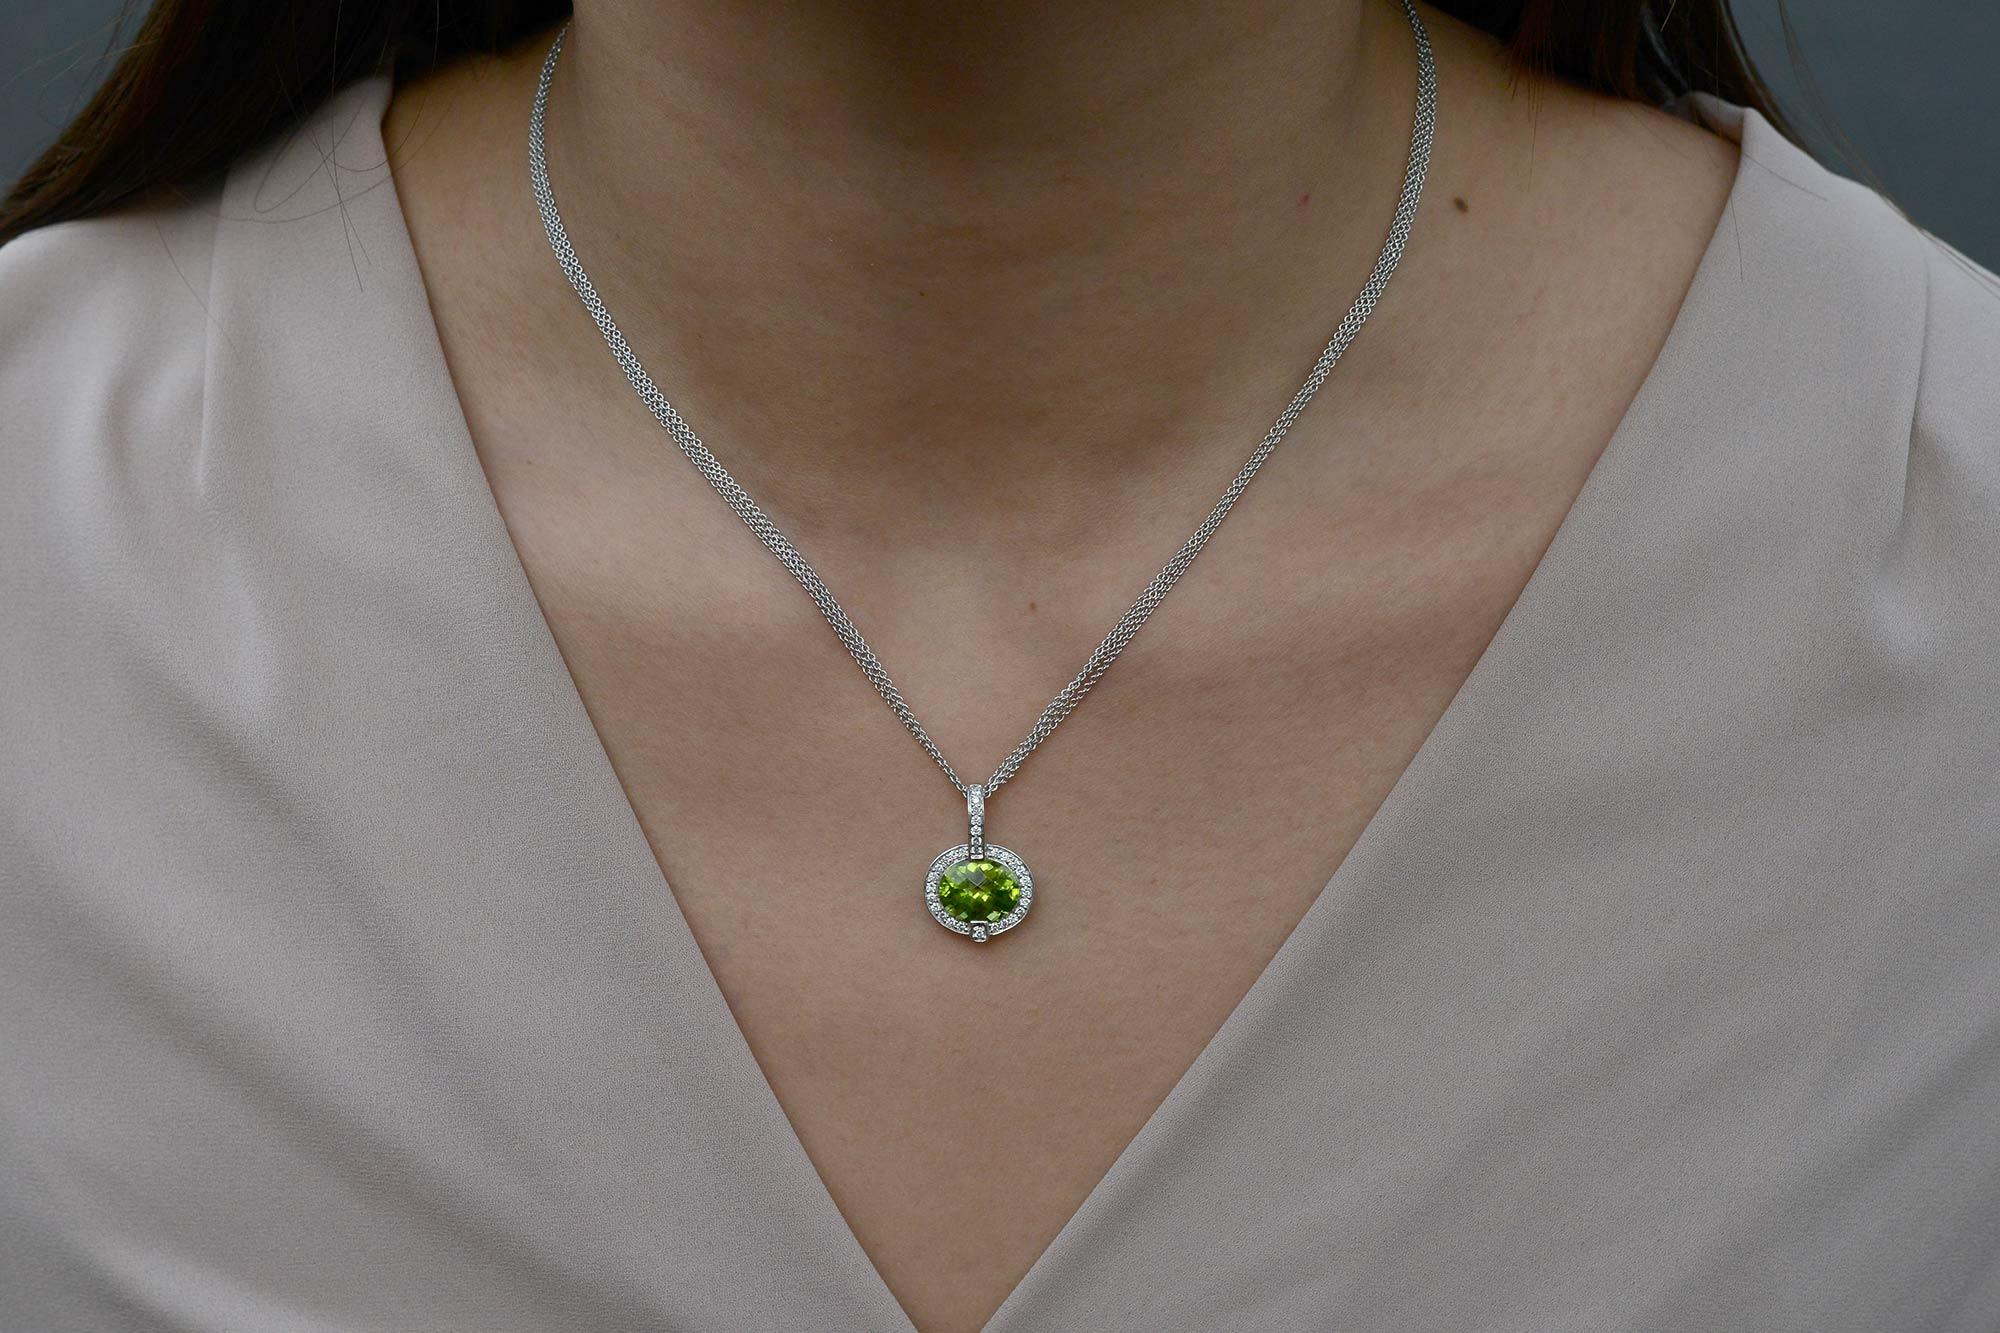 This show stopping necklace parades the finest quality intense green peridot oriented in an unusual east to west setting. The striking gemstone pendant is encircled by a luminous diamond frame seductively suspended by sleek 18k white gold strands. A